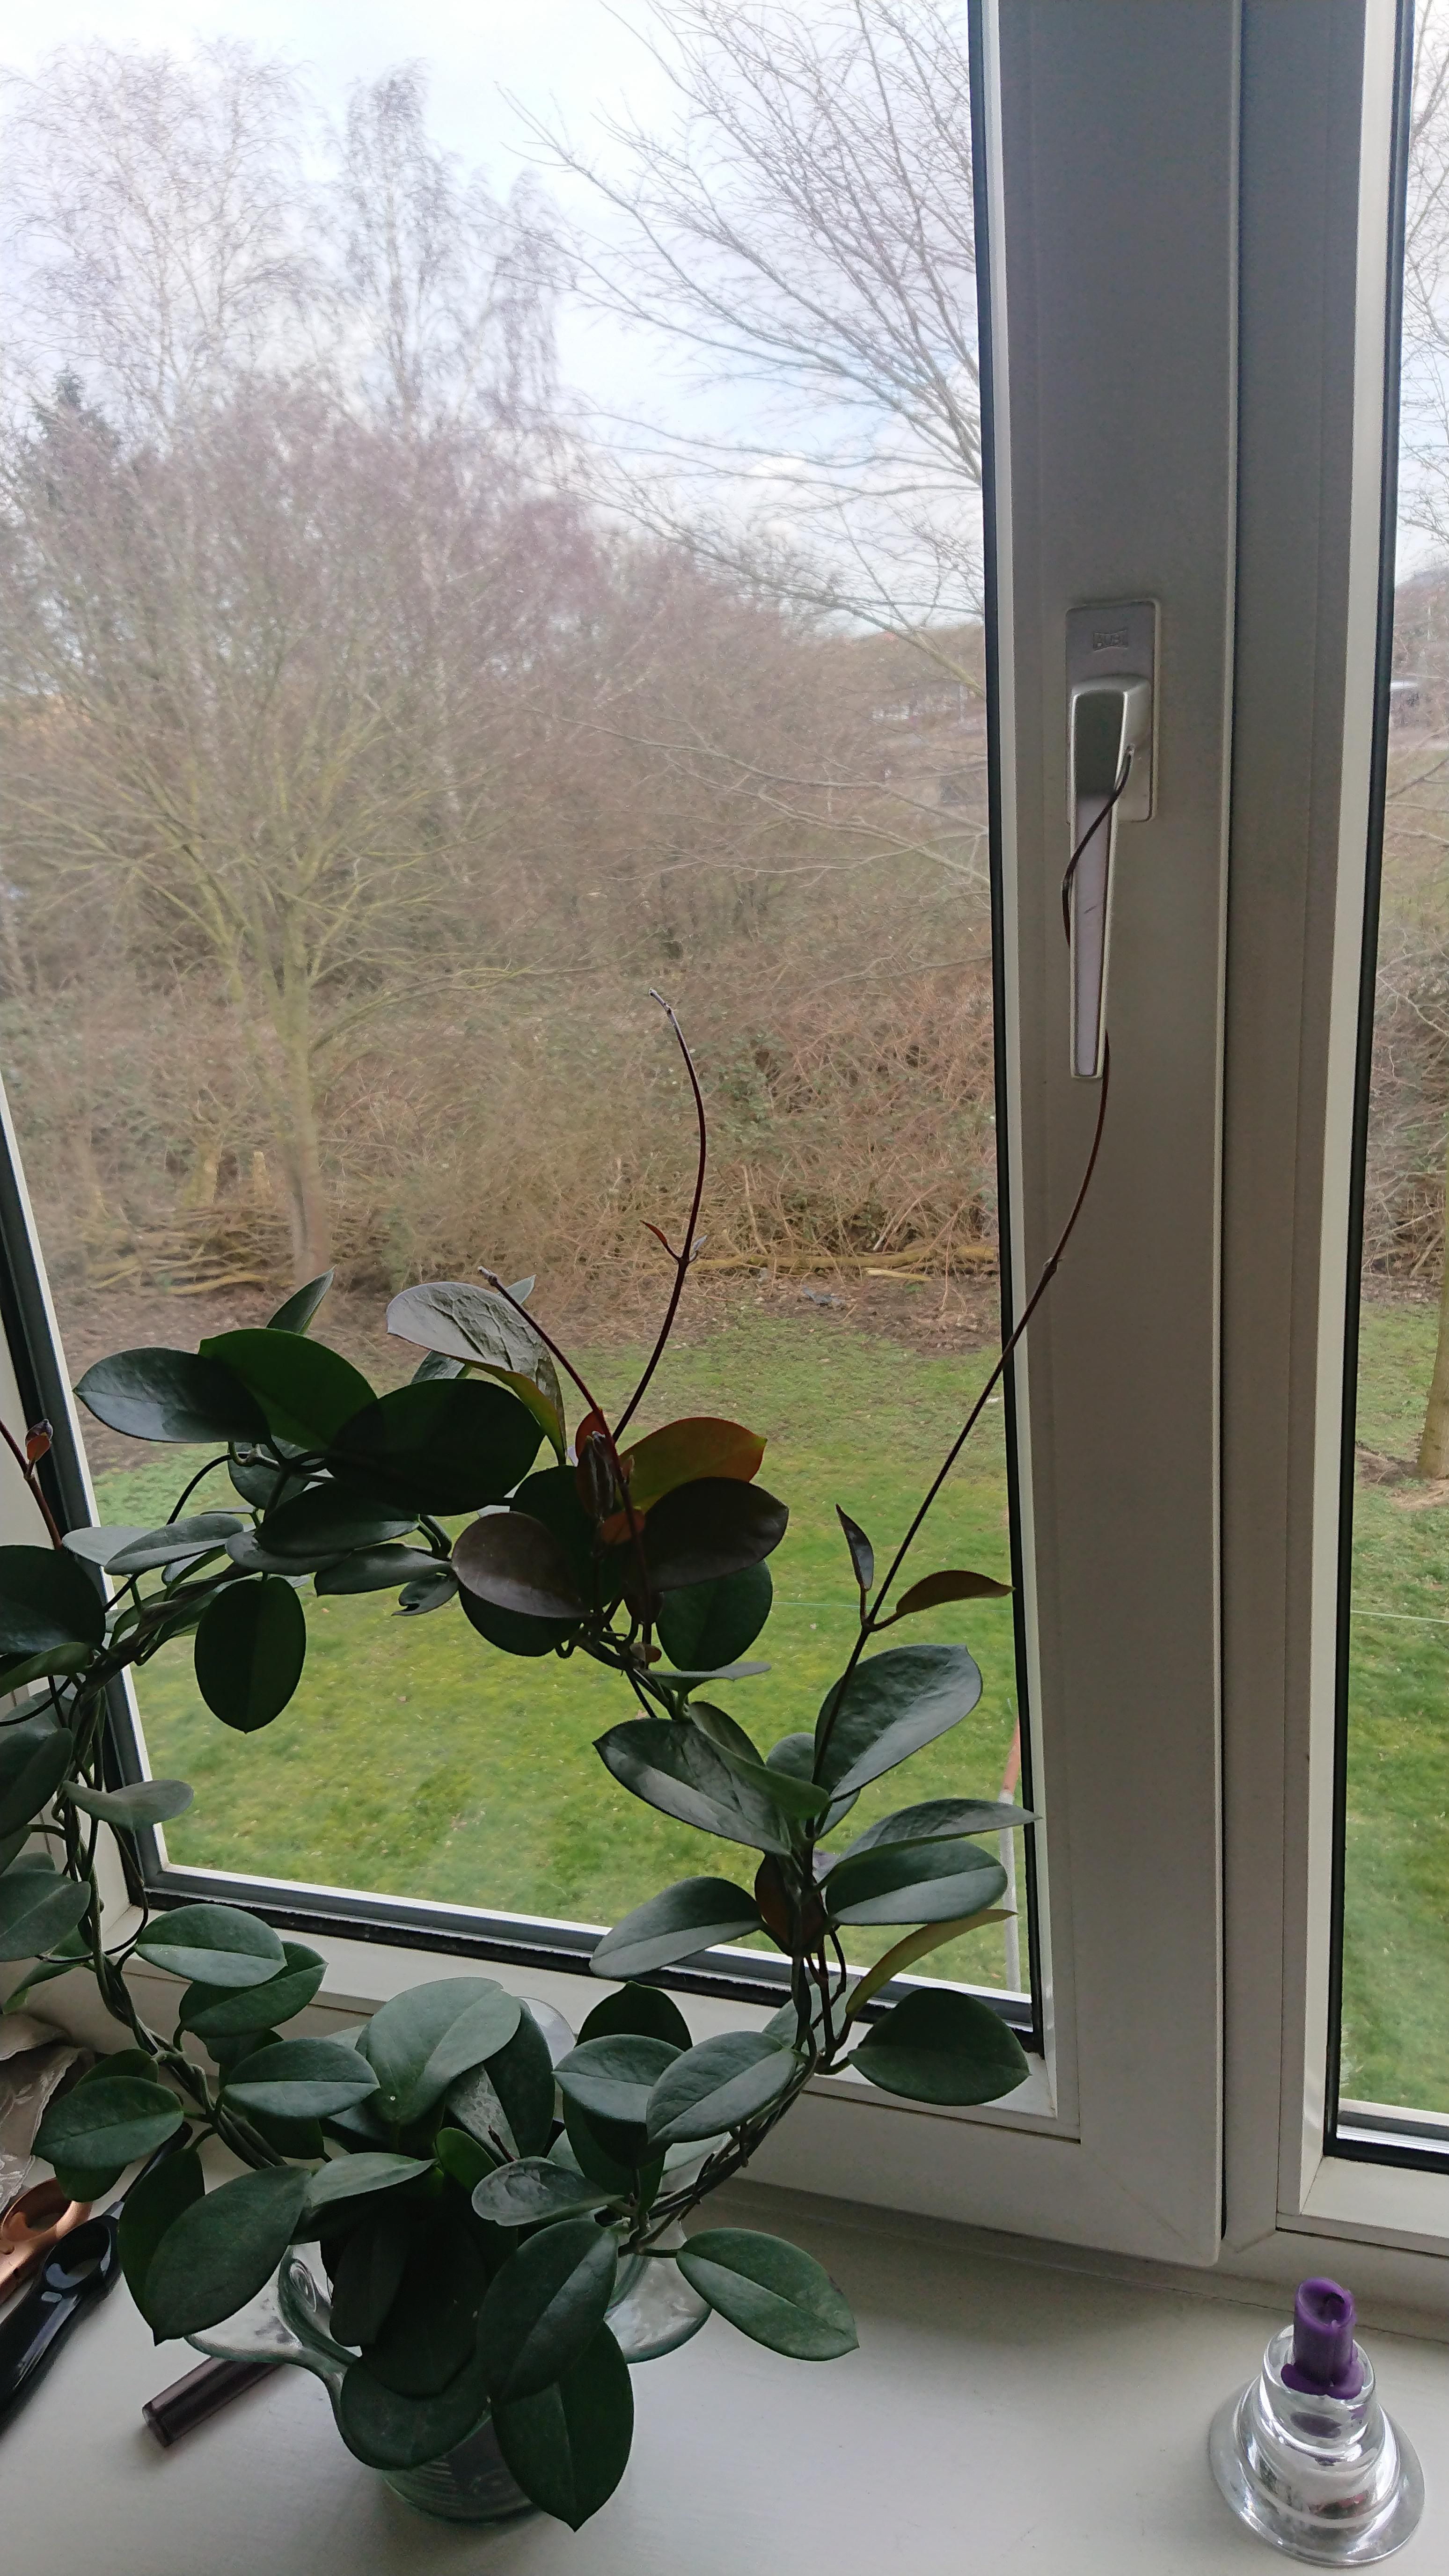 My plant is trying to escape!